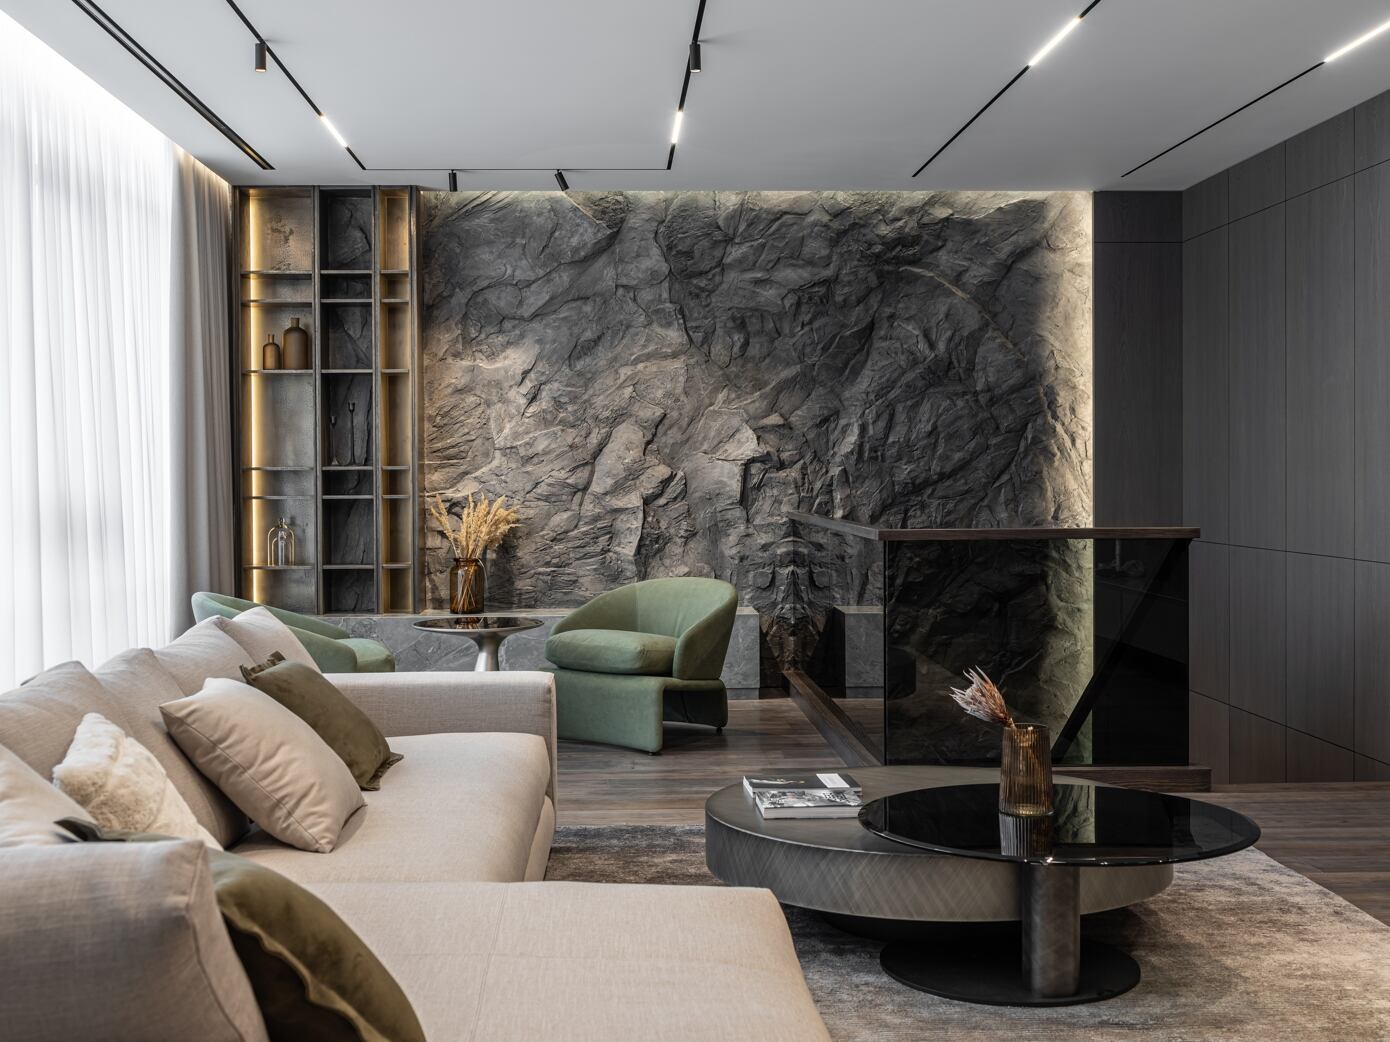 STONE Apartment by 33bY Architecture